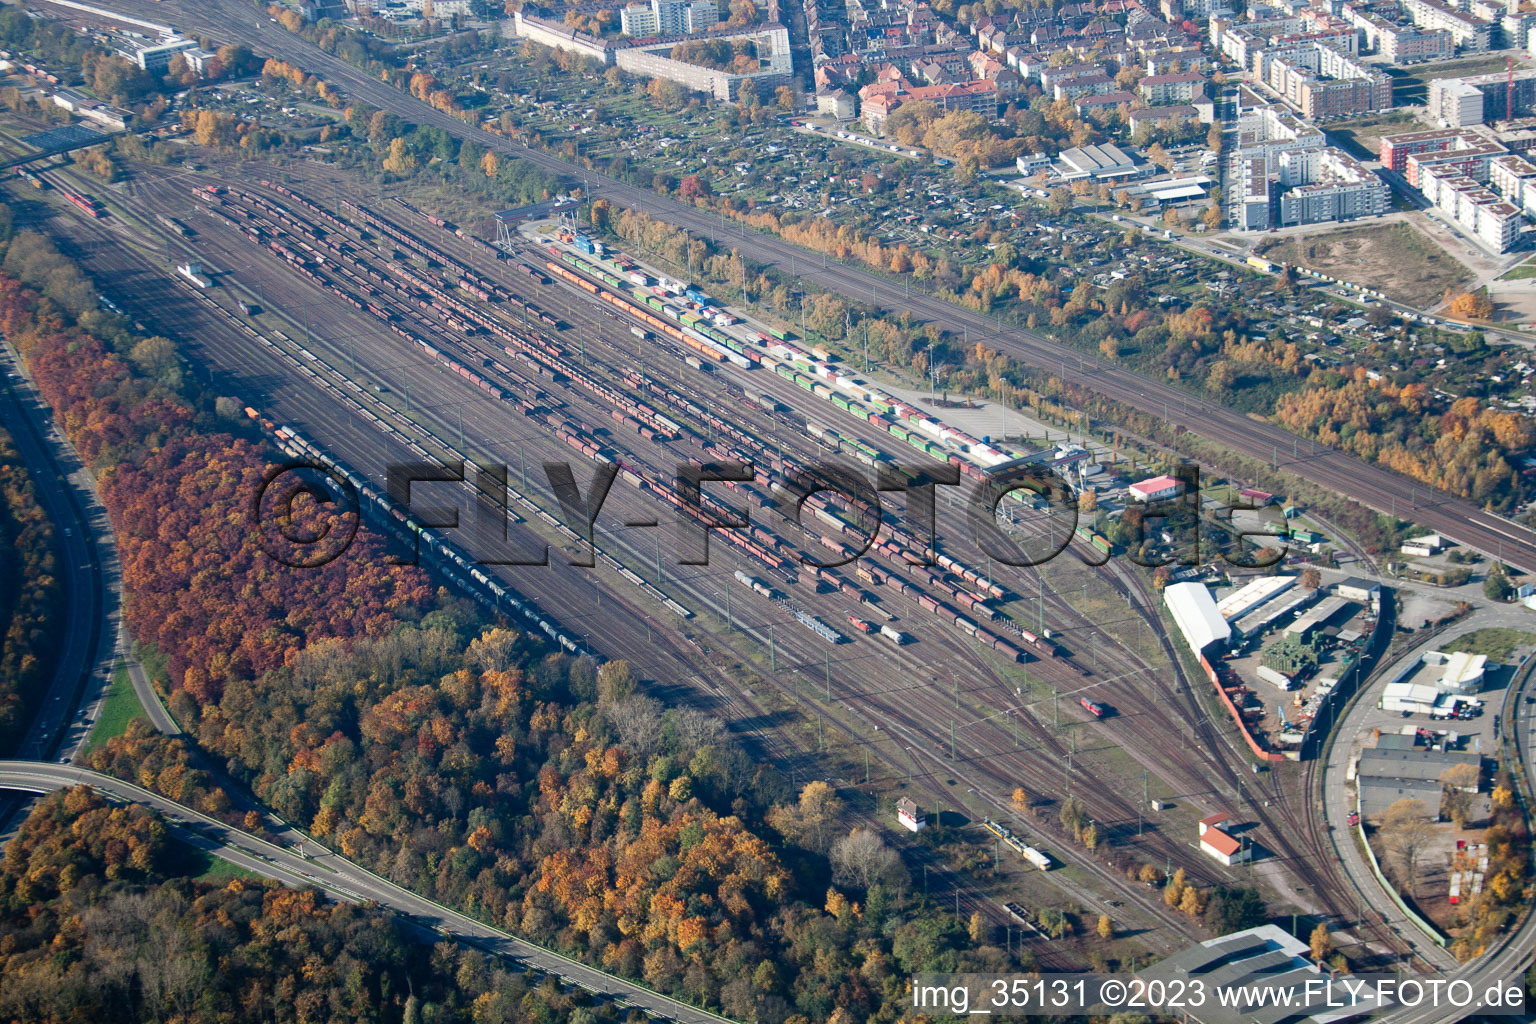 Aerial photograpy of Freight depot in the district Südstadt in Karlsruhe in the state Baden-Wuerttemberg, Germany